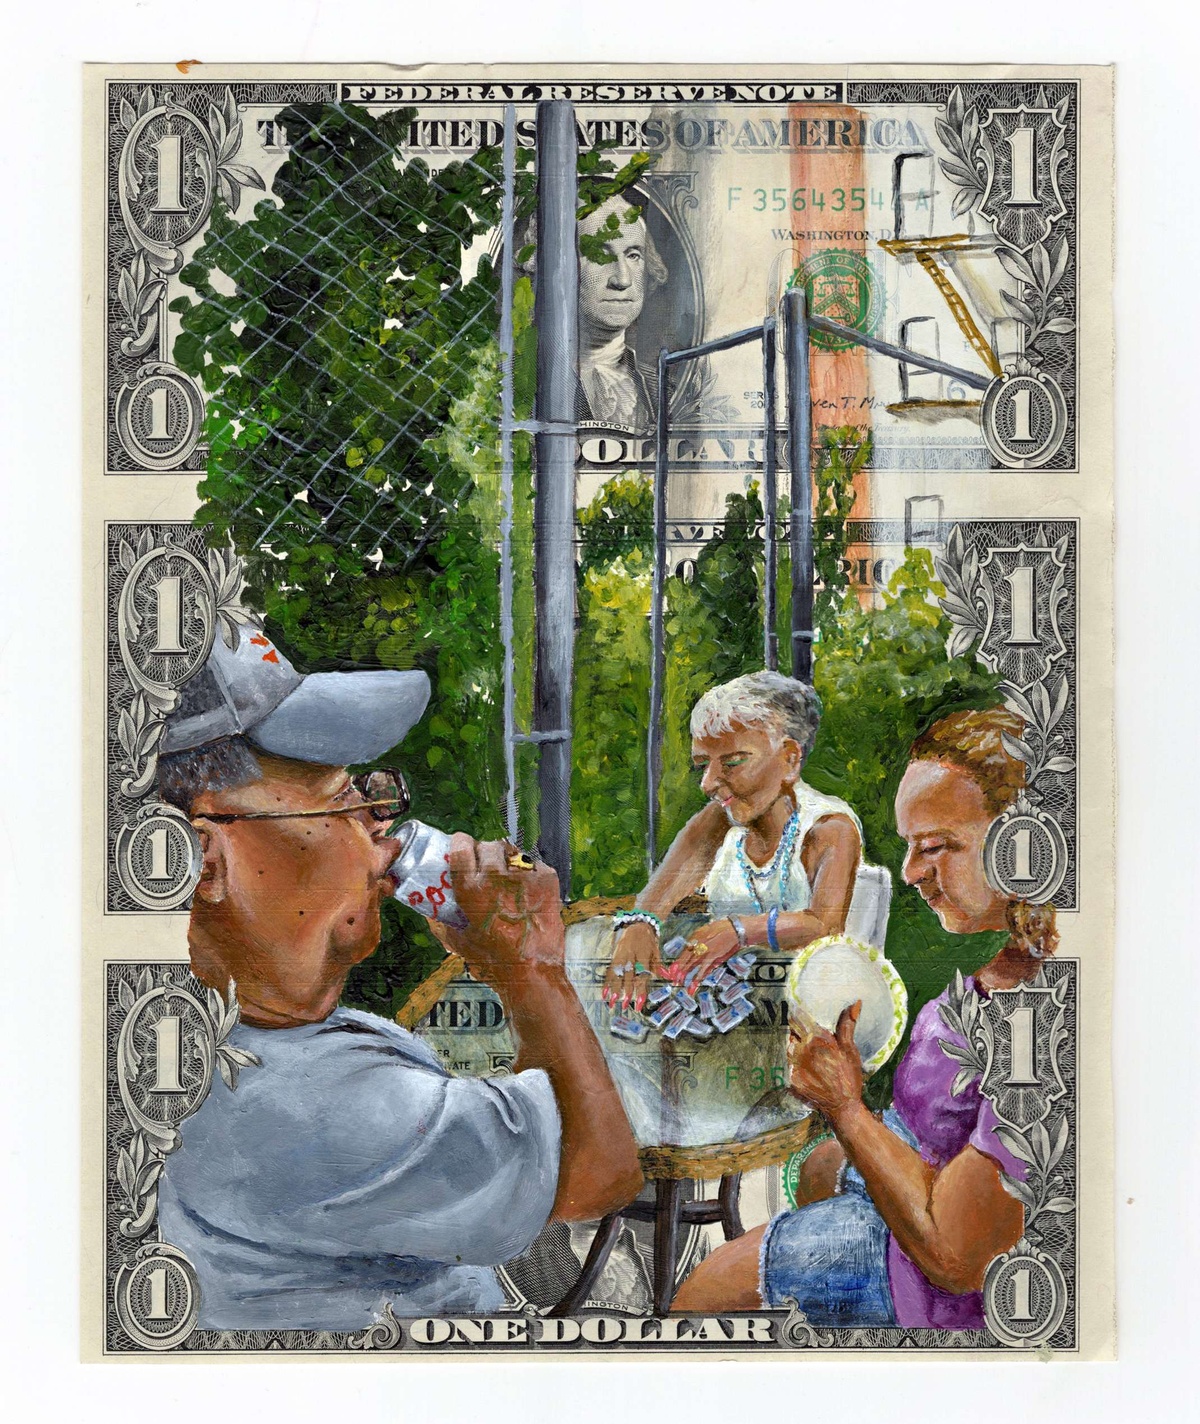 A painting on three one-dollar bills depicting people enjoying a nice day surrounded by trees. One is drinking a beer, the other playing a game, and another embroidering.